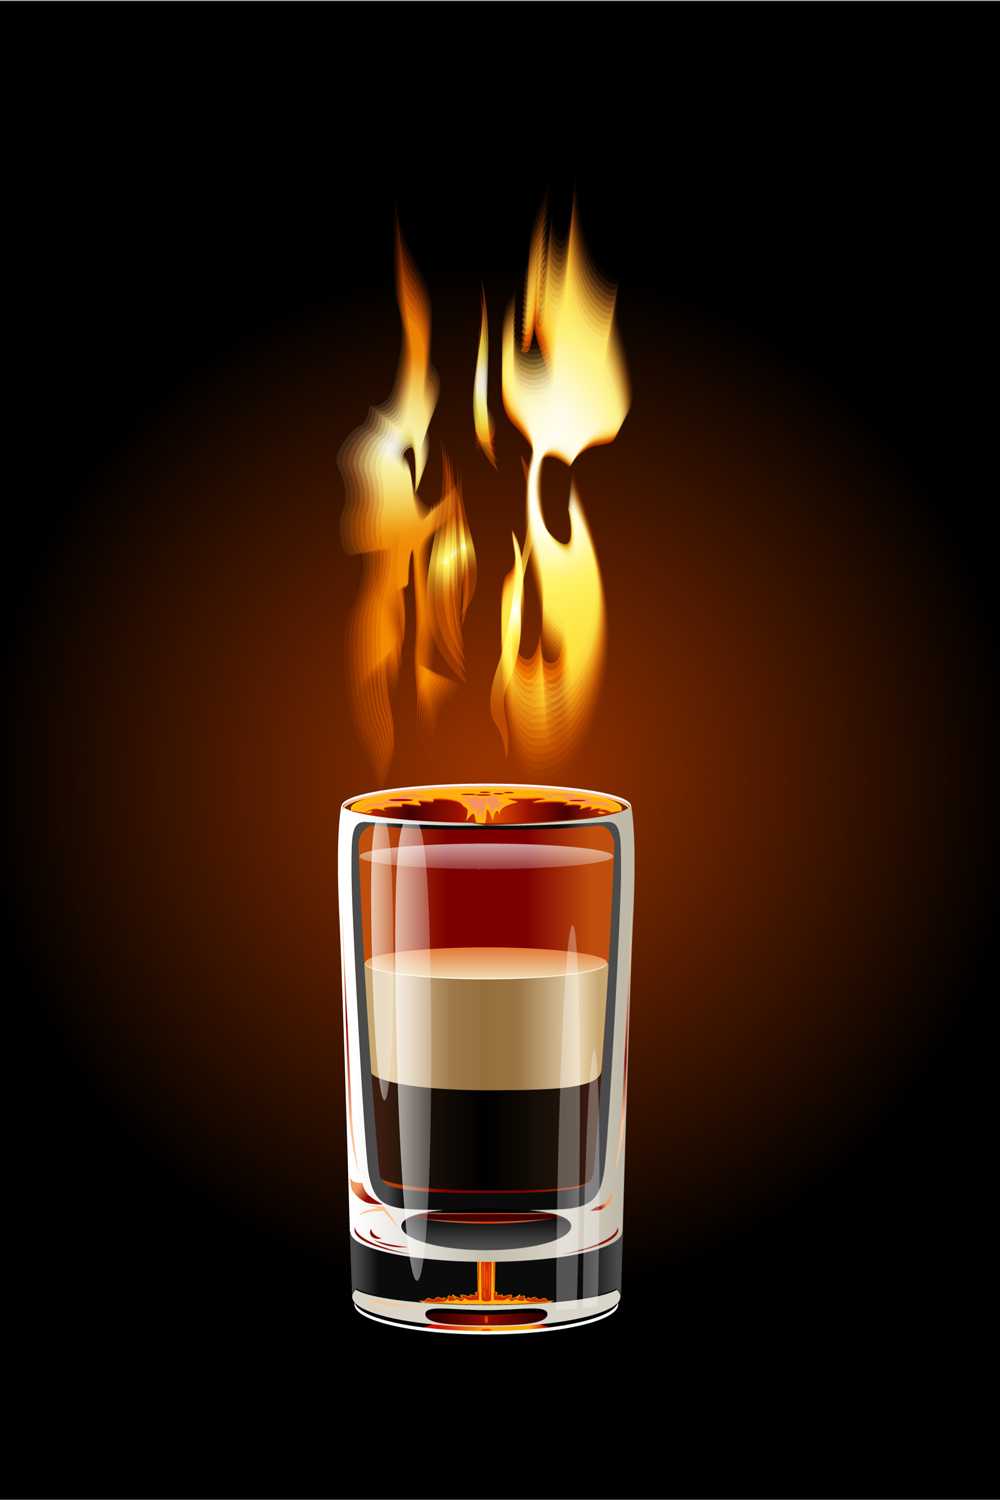 B52 layered shot digial rendering. The top layer of spirit is set on fire by the bar tener. 